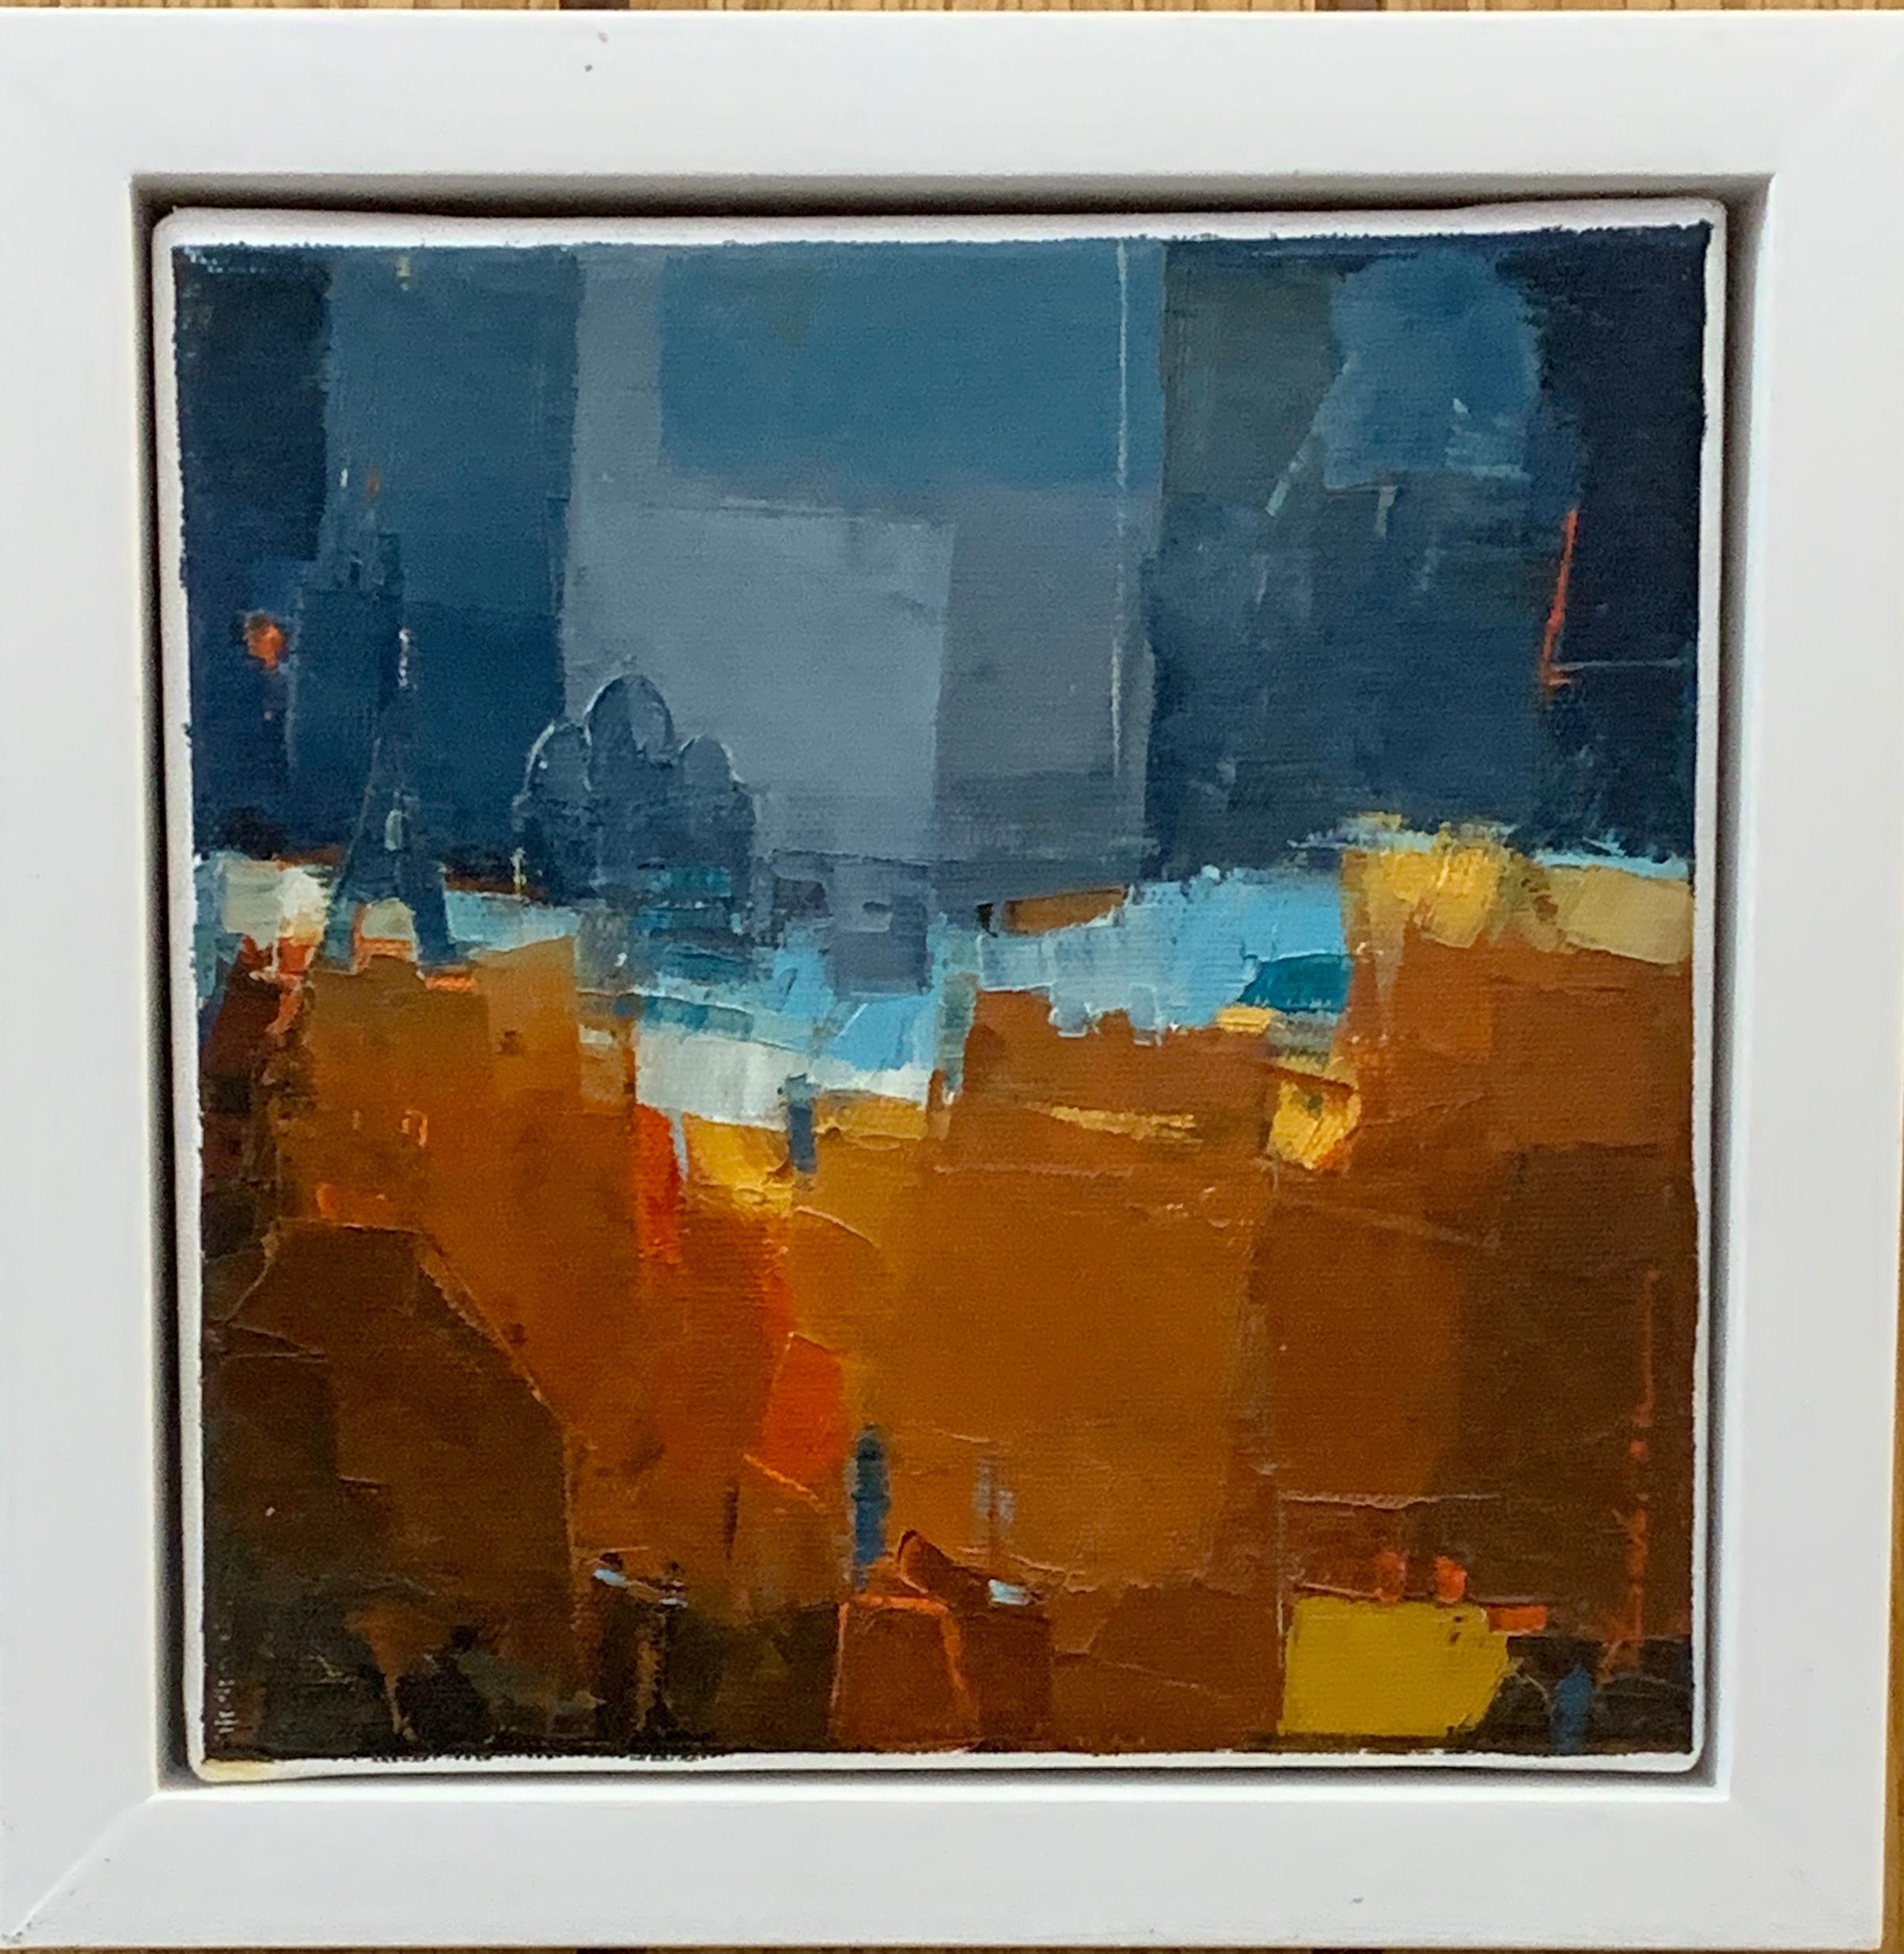 Abstract view of Paris, France by famous Montmartre female painter, Sacre-Coeur - Painting by Dorothee Dabrou